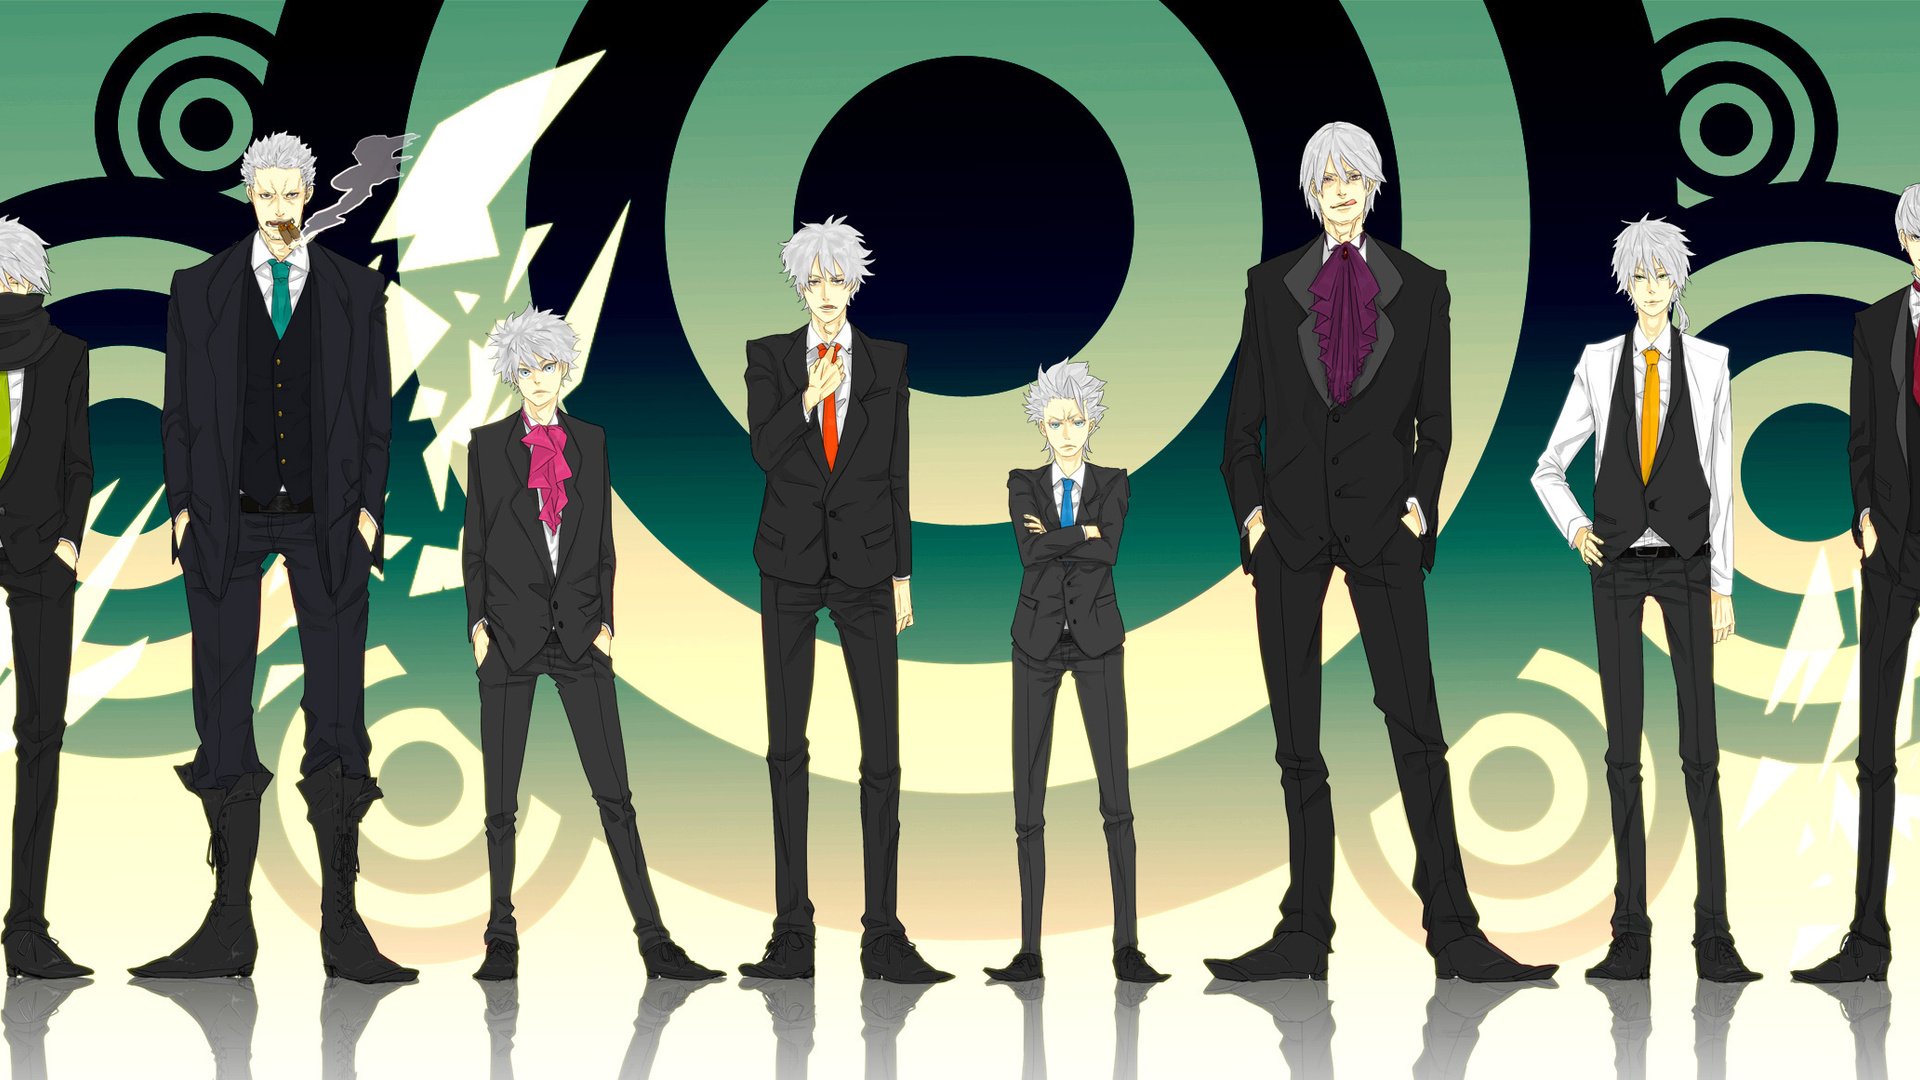 bleach, Prince, Of, Tennis, Hunter, X, Hunter, Gintama, Persona, Naruto, One, Piece, Devil, May, Cry, Anime, Series Wallpaper